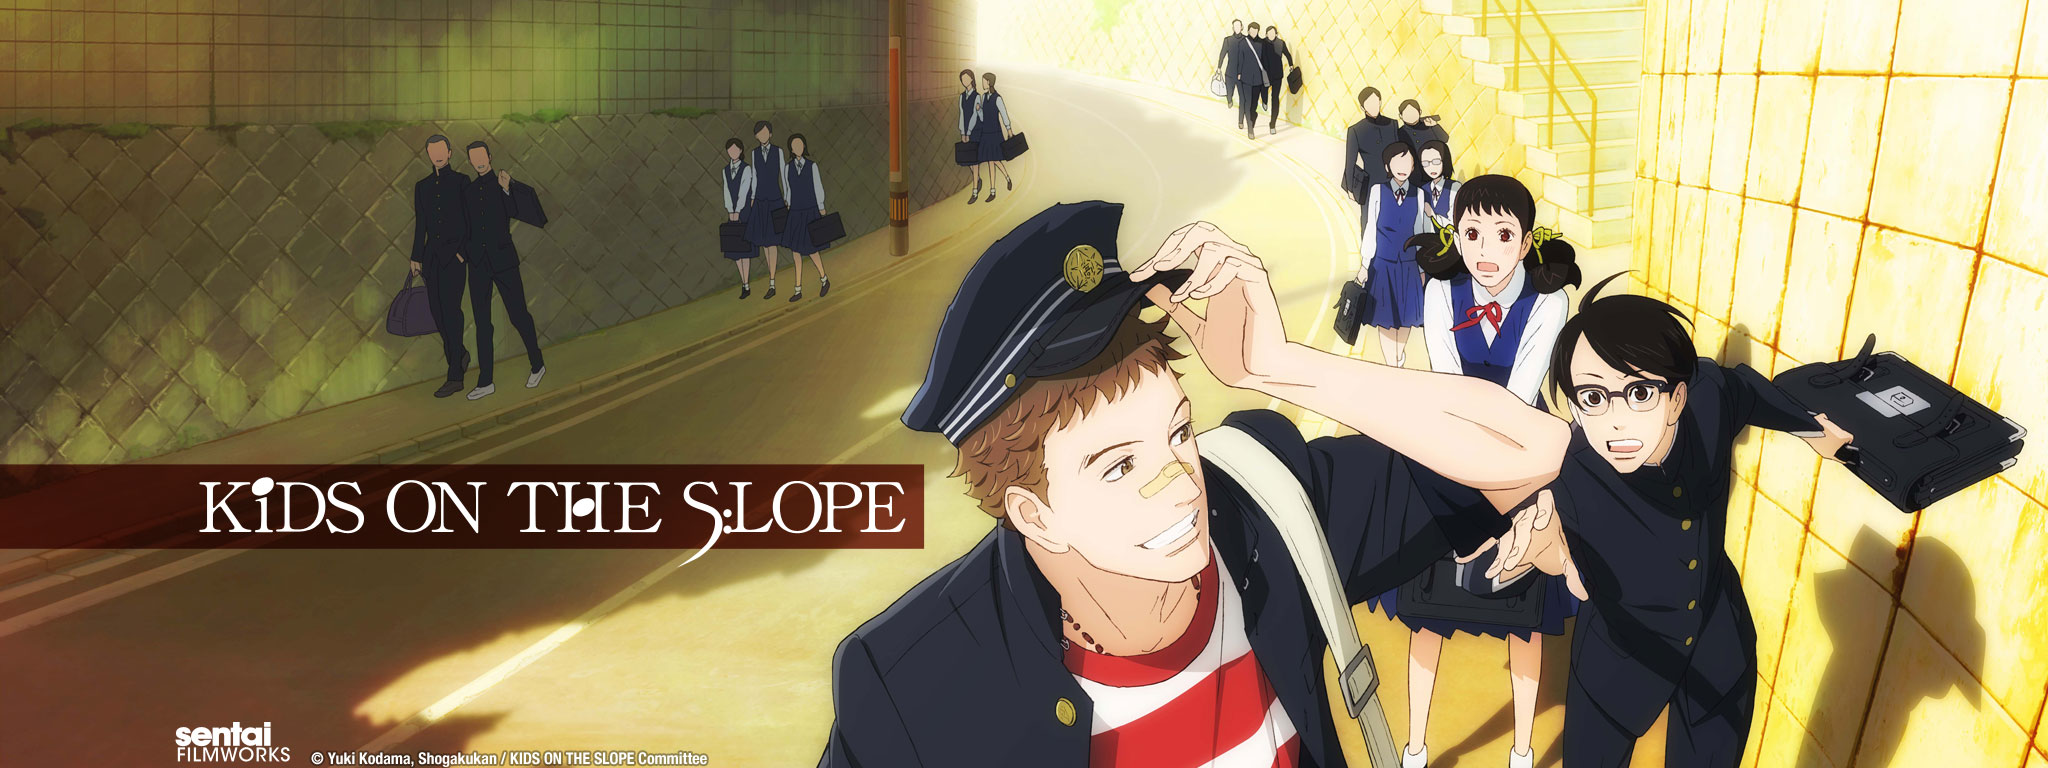 Title Art for Kids on the Slope